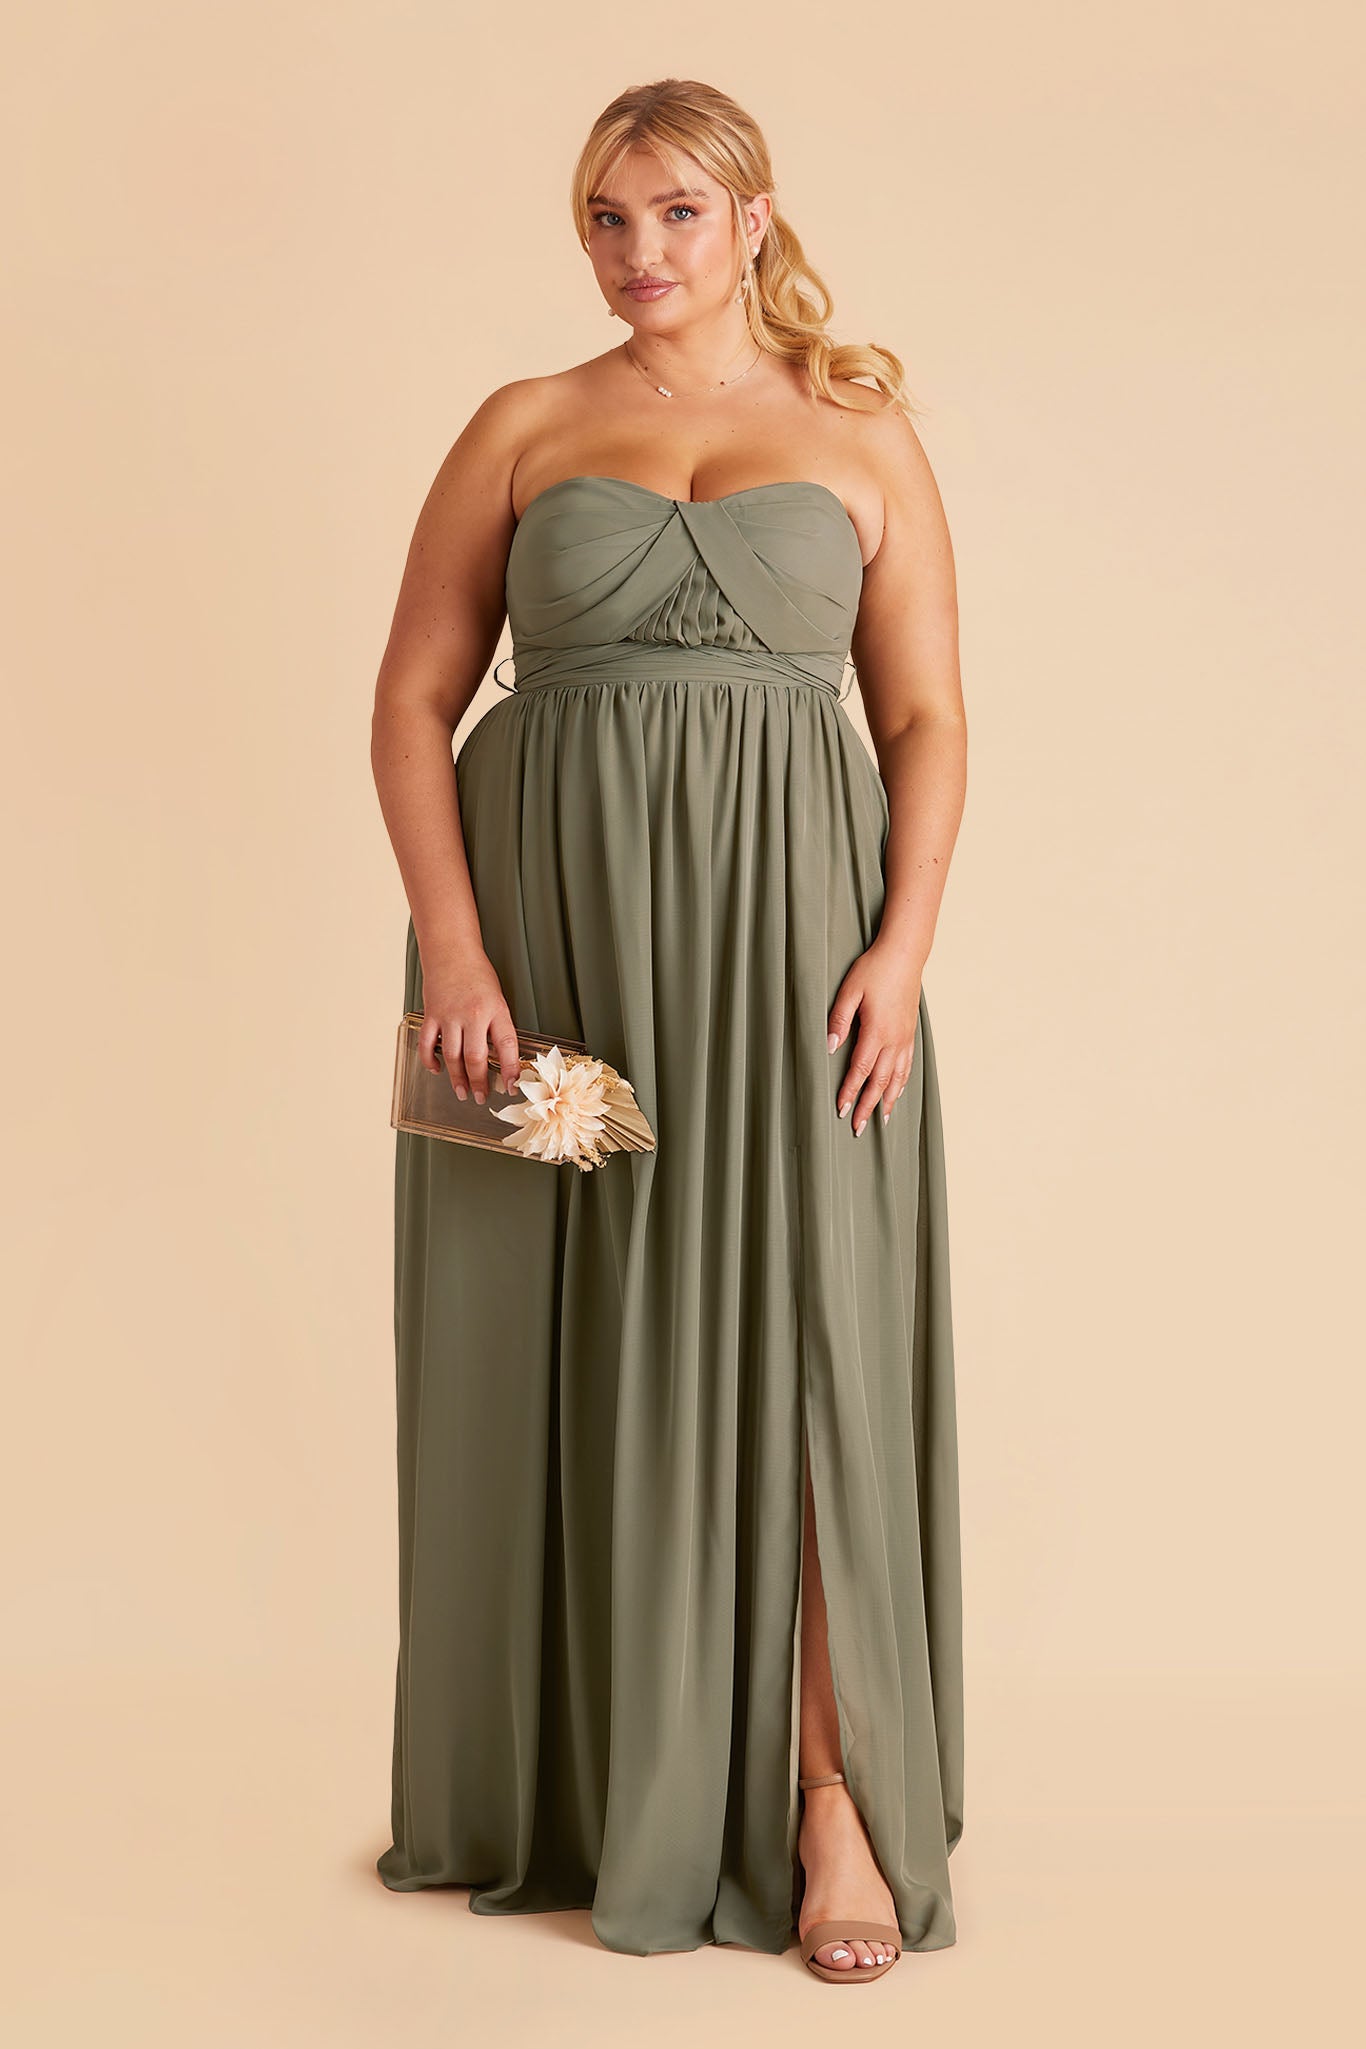 Grace plus size convertible bridesmaid dress in Moss Green Chiffon by Birdy Grey, front view